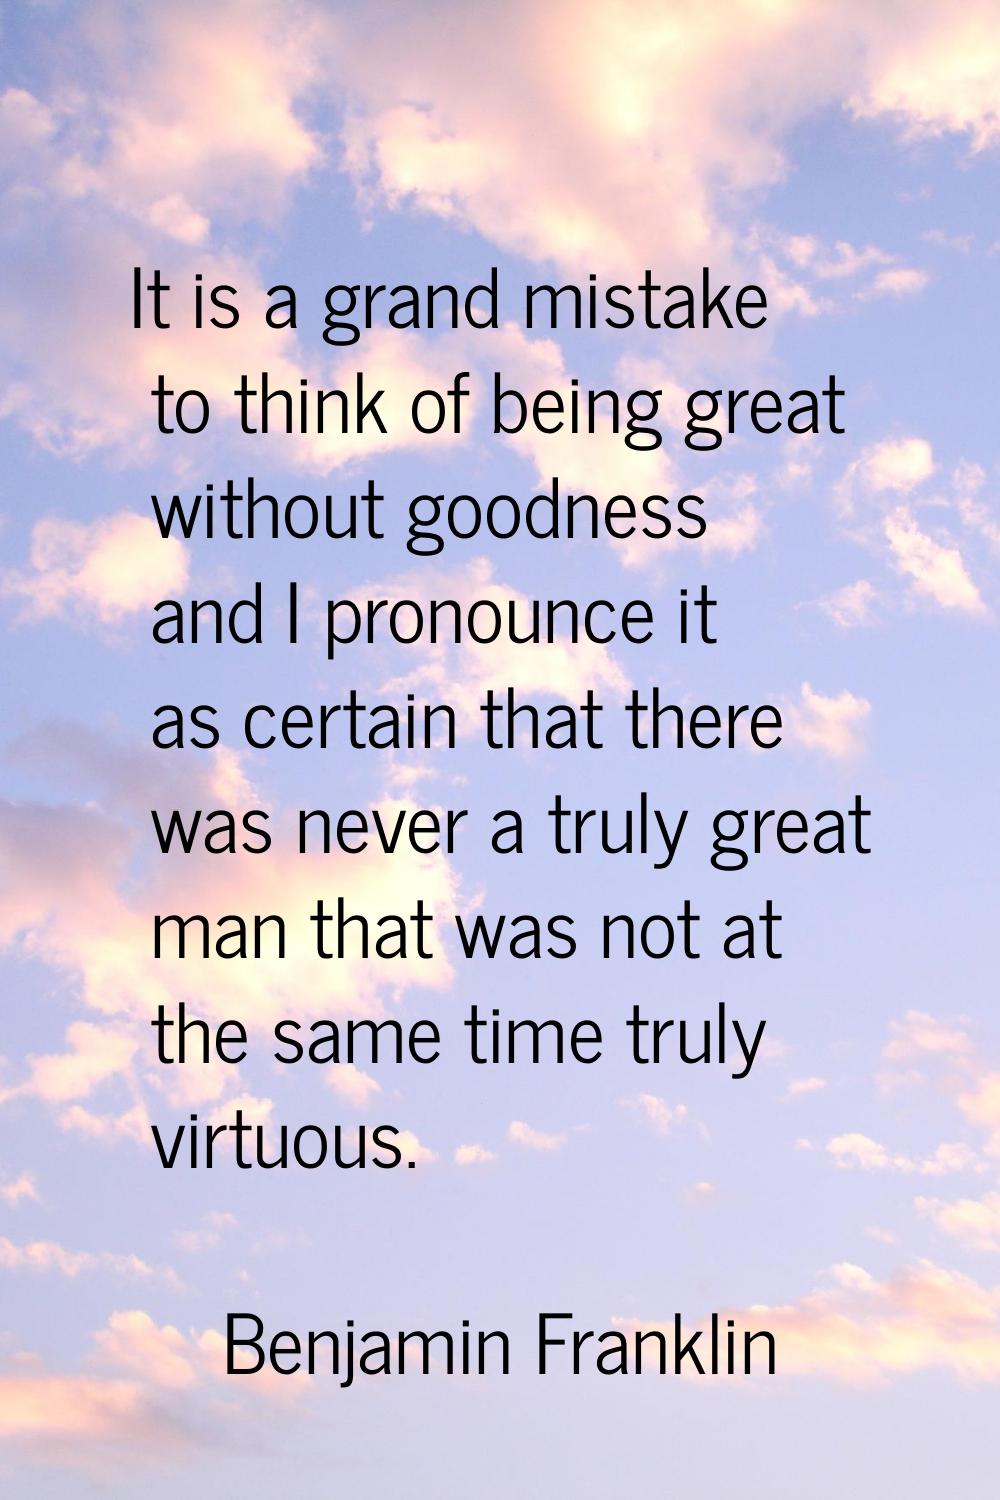 It is a grand mistake to think of being great without goodness and I pronounce it as certain that t